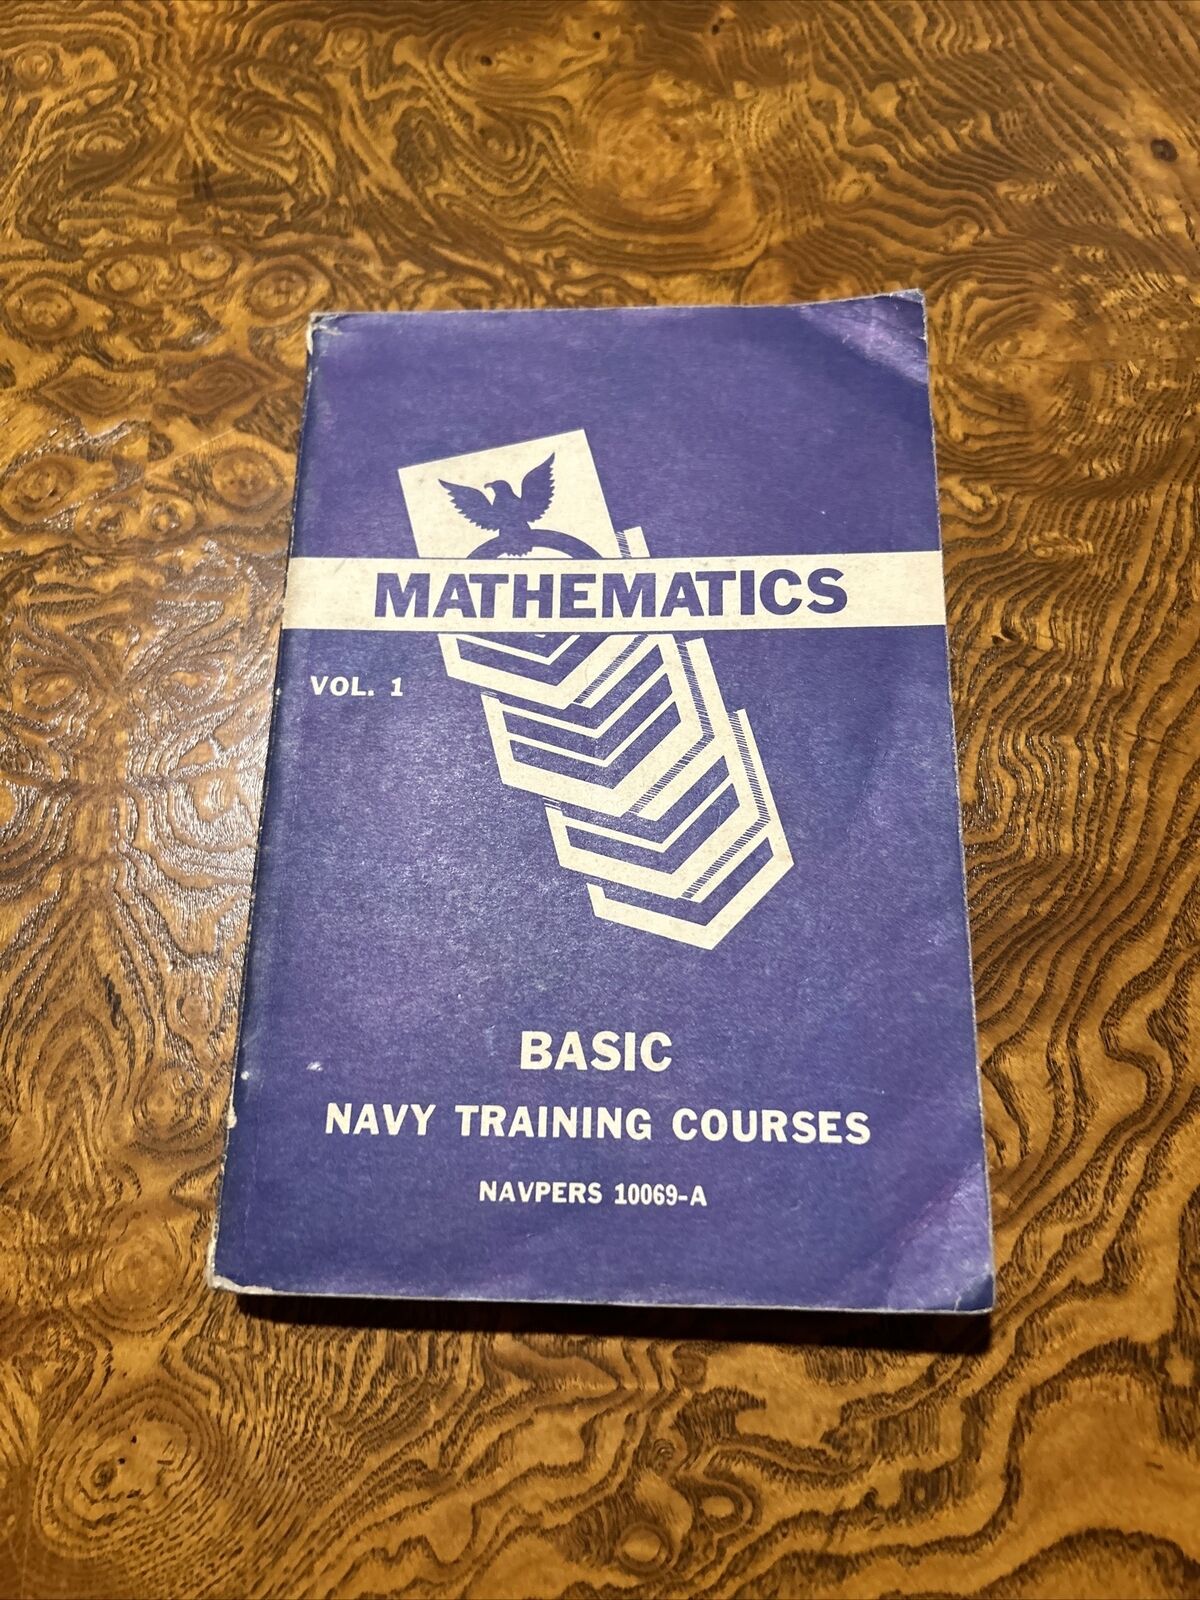 1951 Basic Navy Training Courses Mathematics Volume 1 Softcover NAVPERS 10069-A